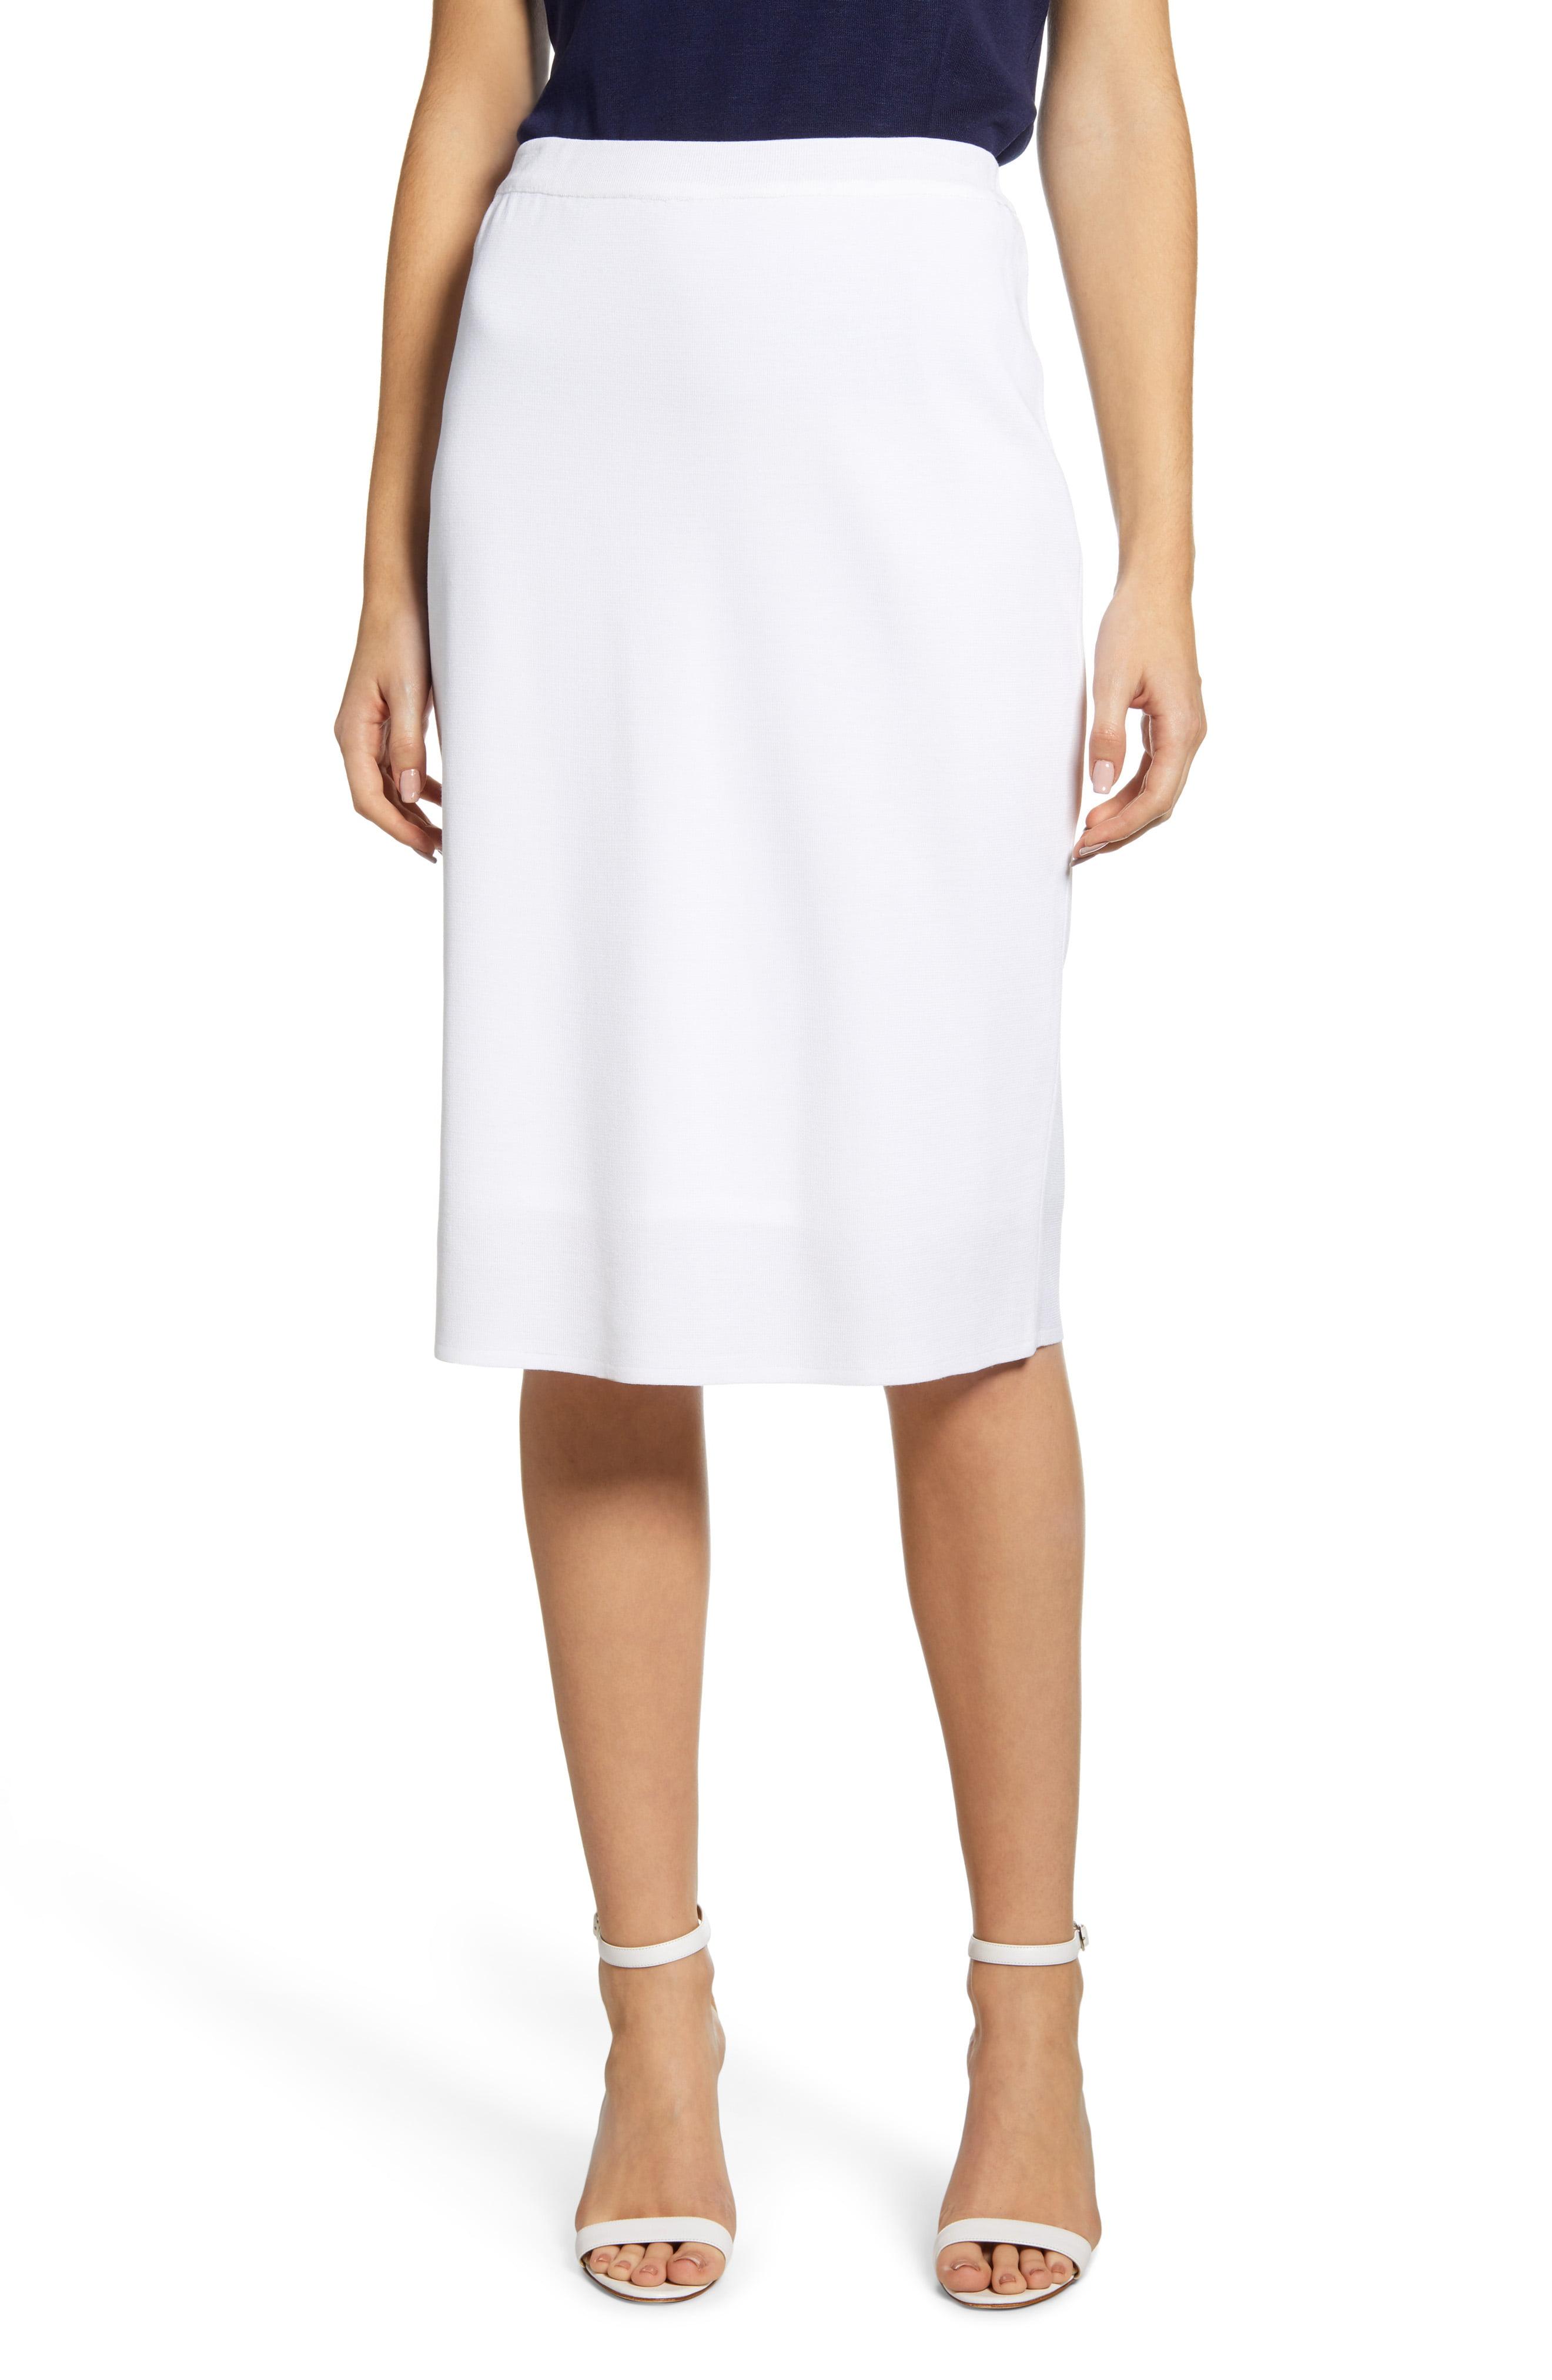 Ming Wang A-line Knit Skirt in White - Lyst